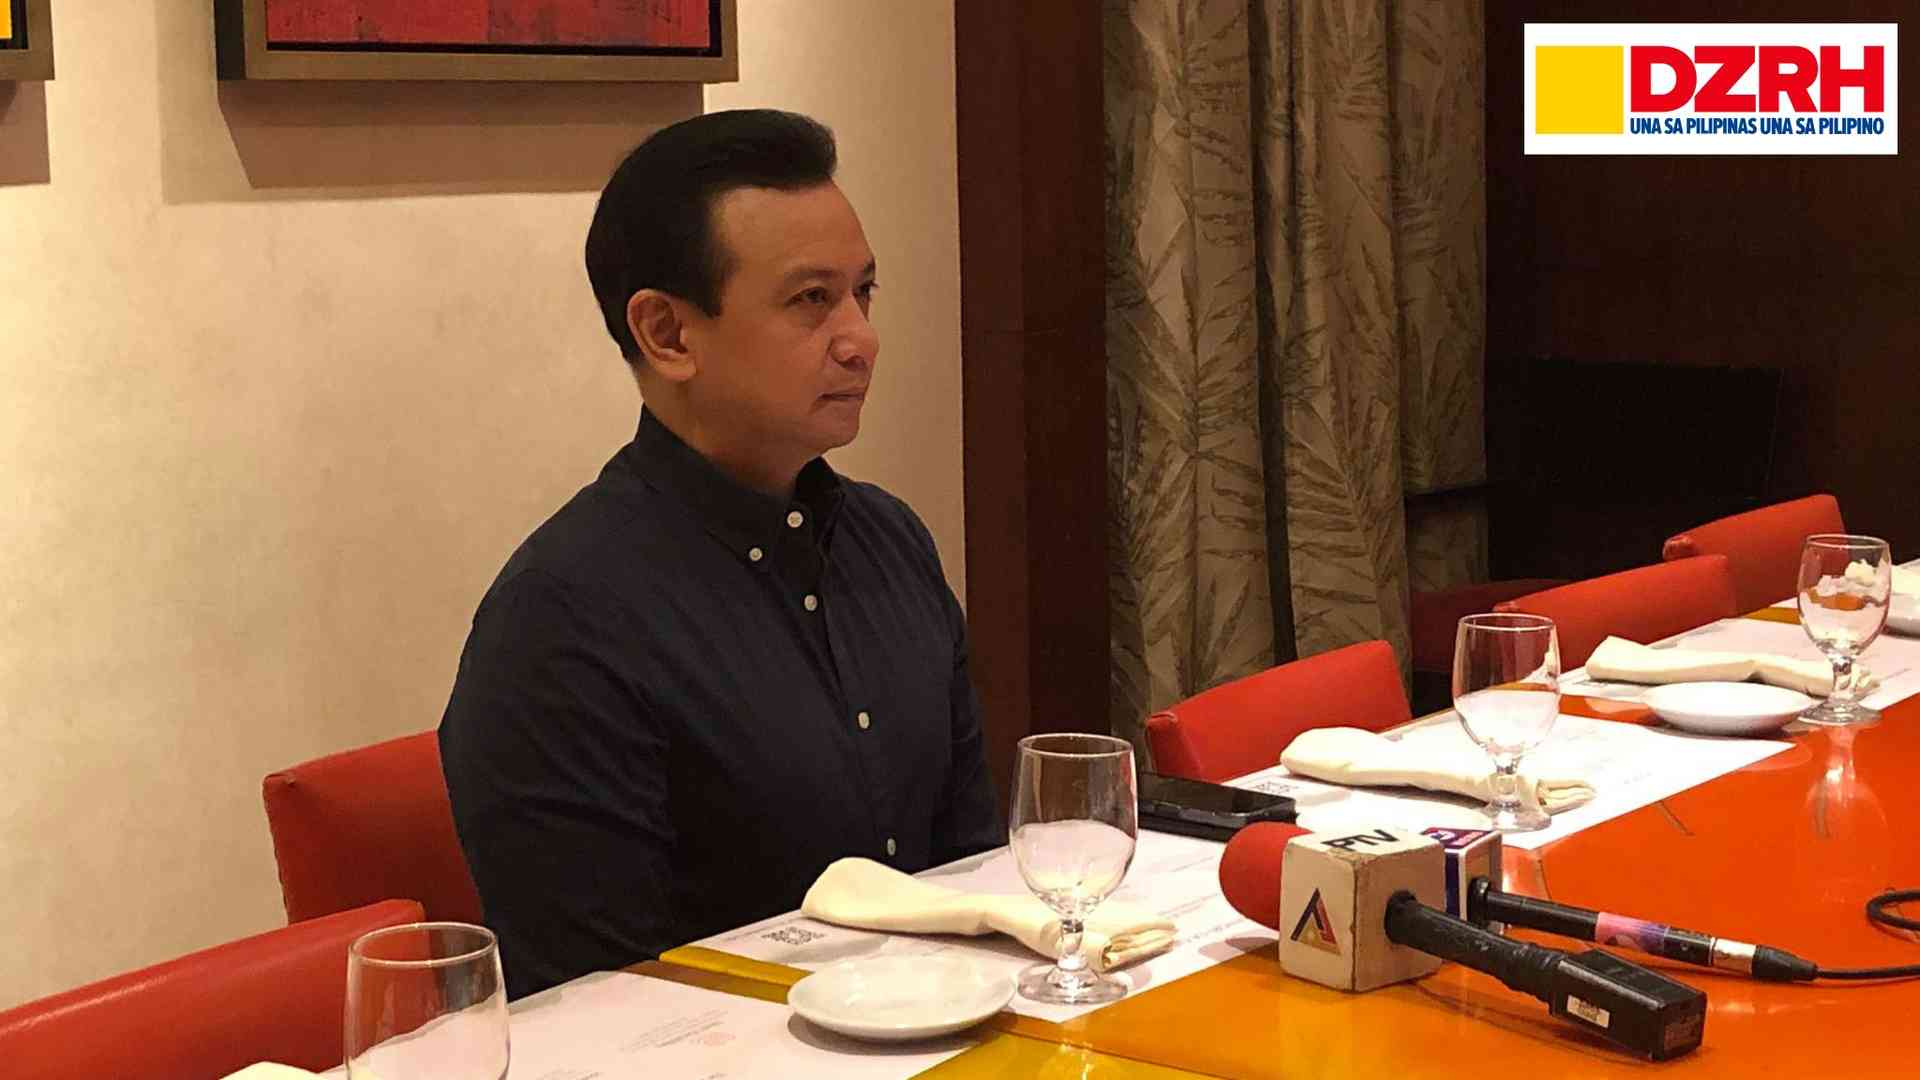 Trillanes: High-ranking PNP officials recruiting for ouster plot against PBBM